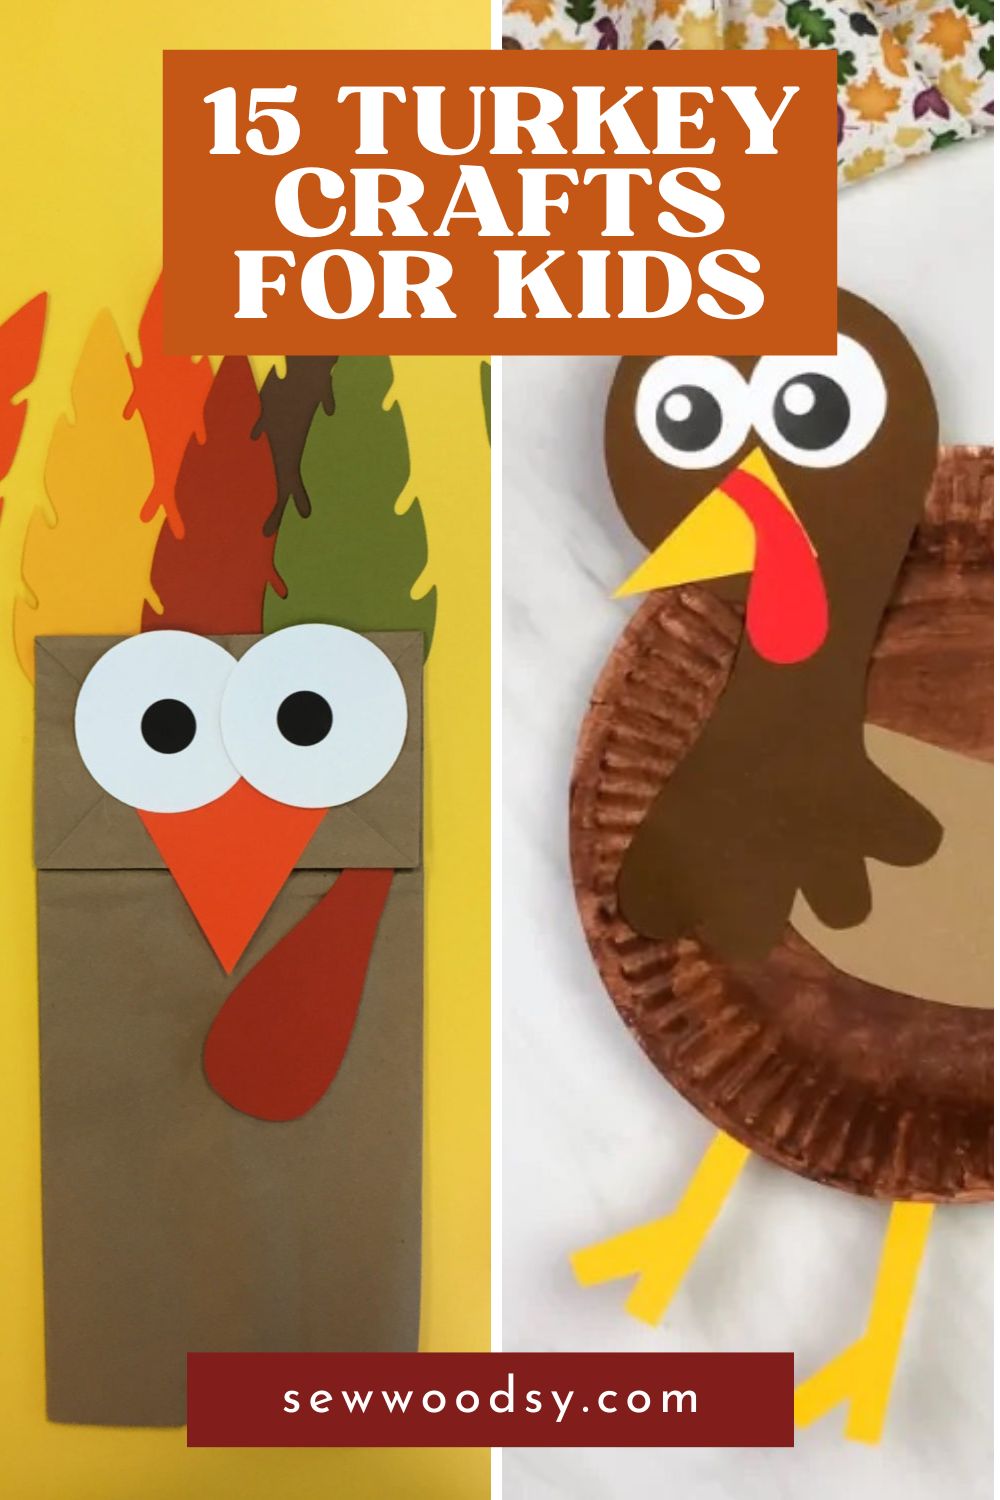 Paper bag turkey puppet and brown turkey paper plate craft with text on image for Pinterest.